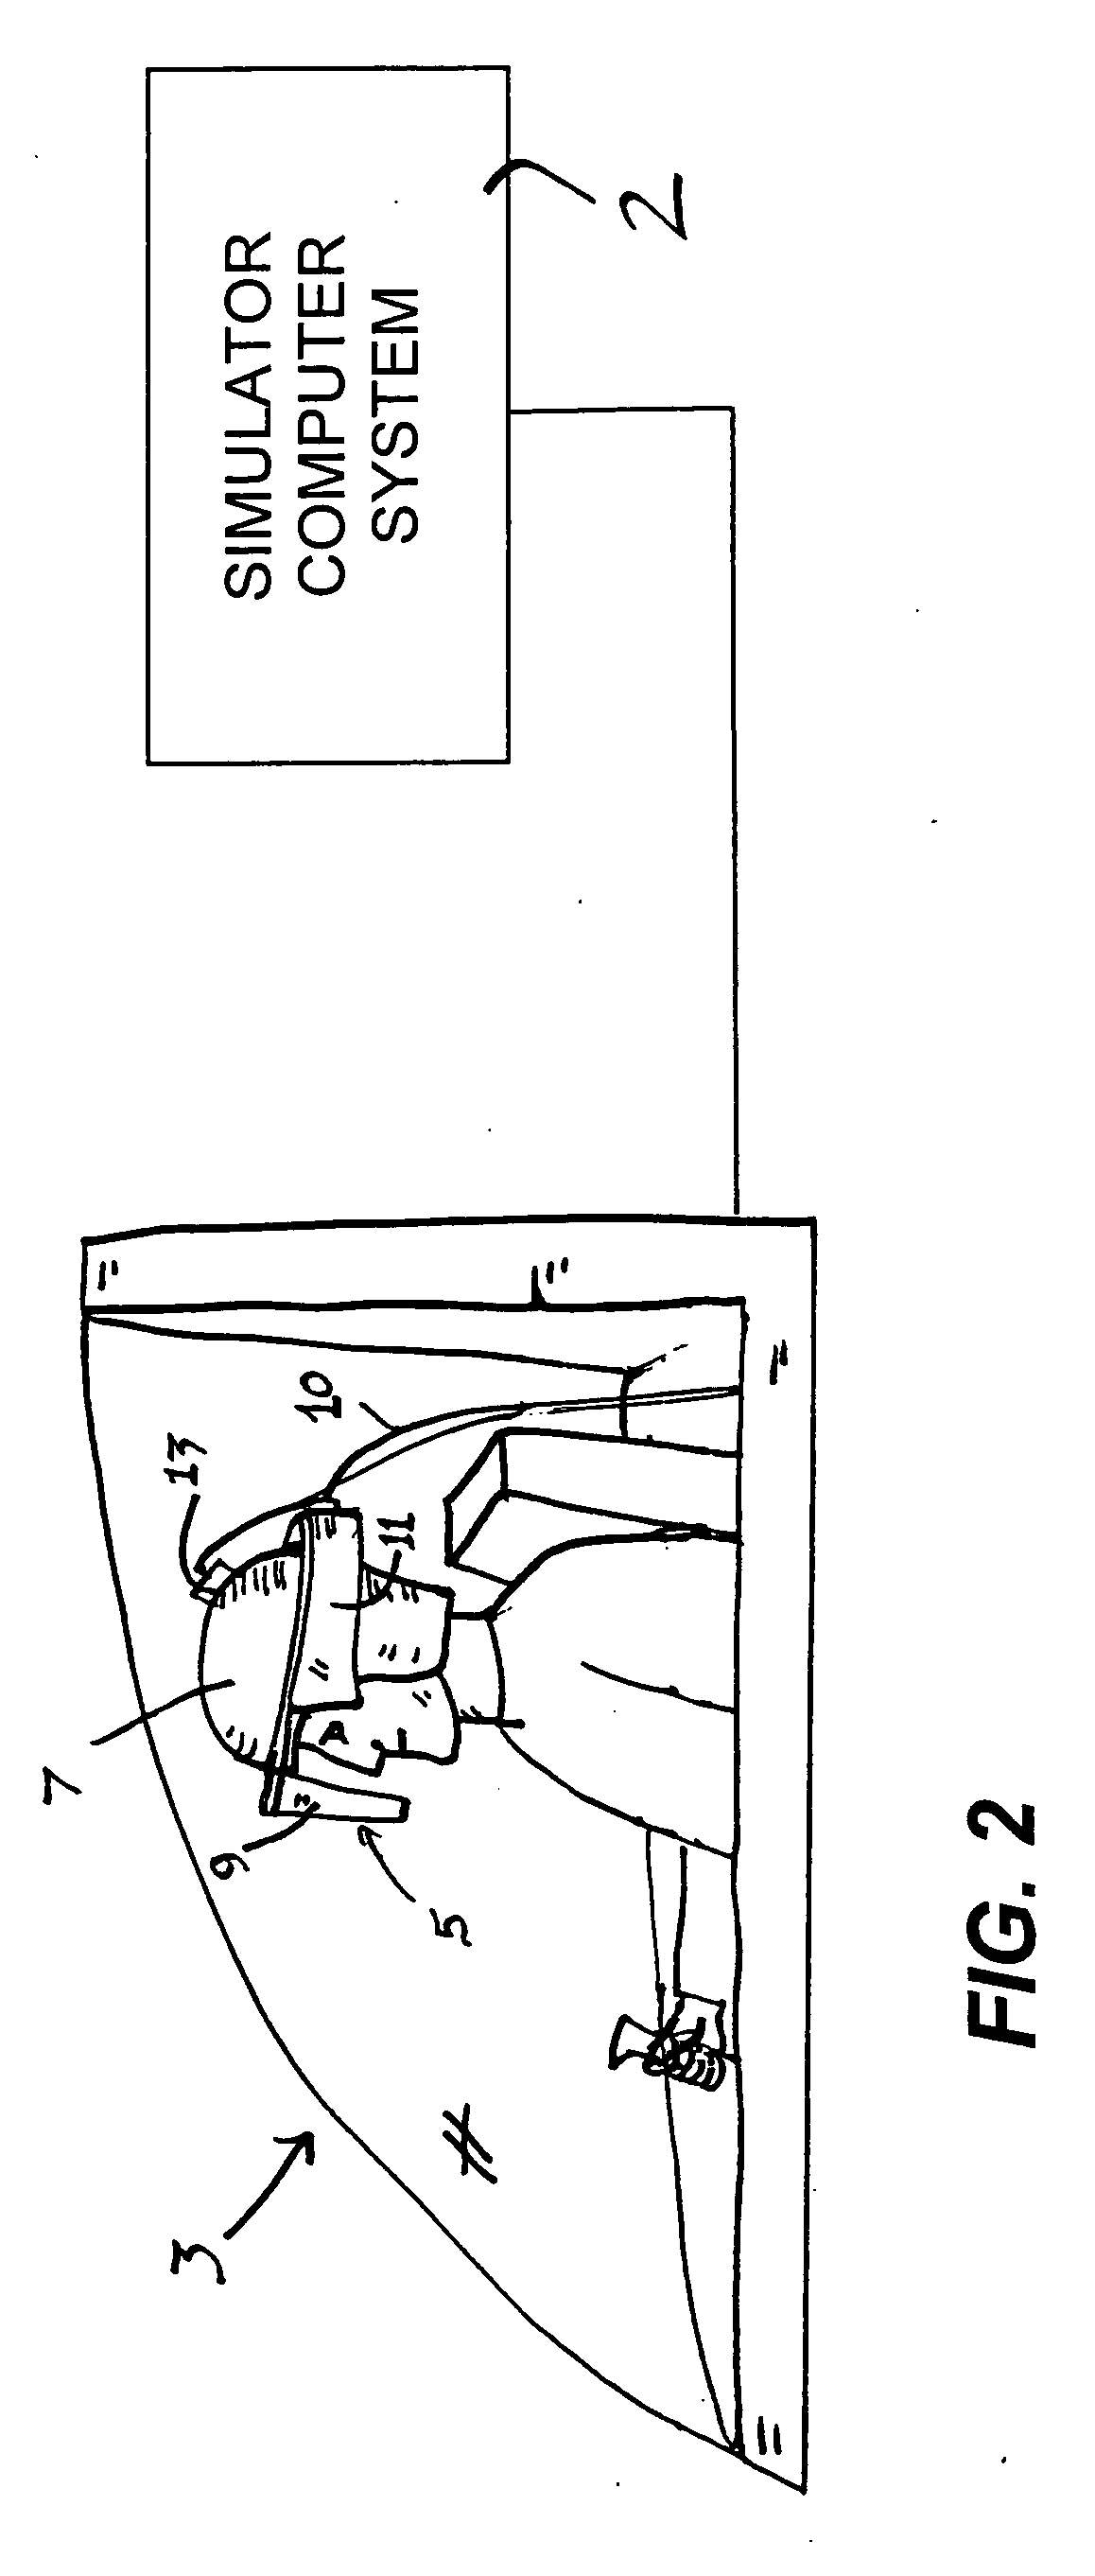 Dynamic display optimization method and system with image motion